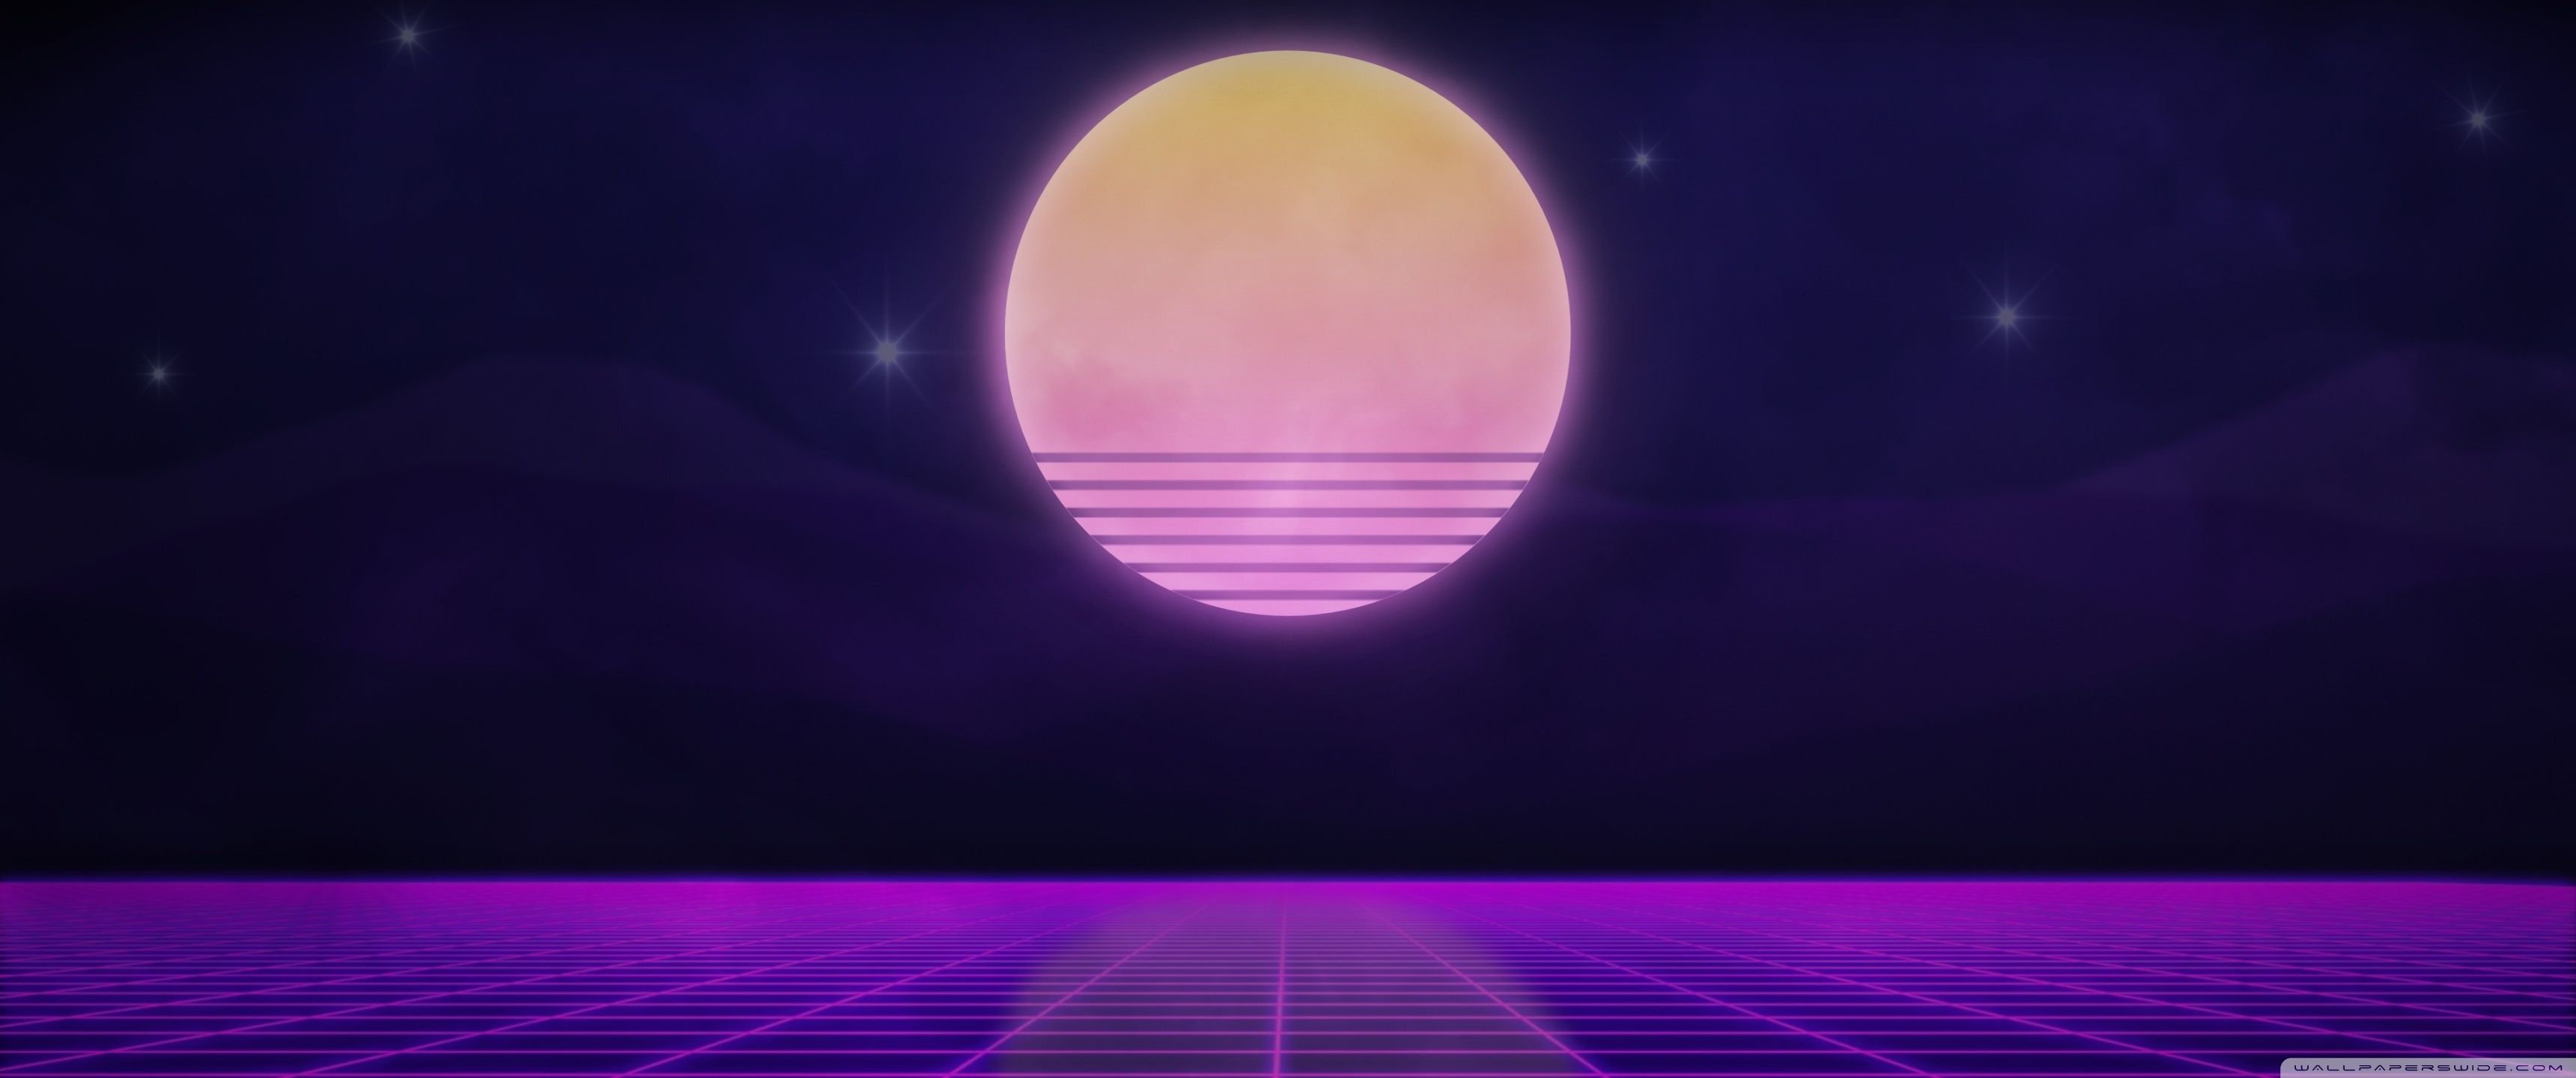 80s retro aesthetic sunset on a virtual neon grid wallpaper background - 3440x1440